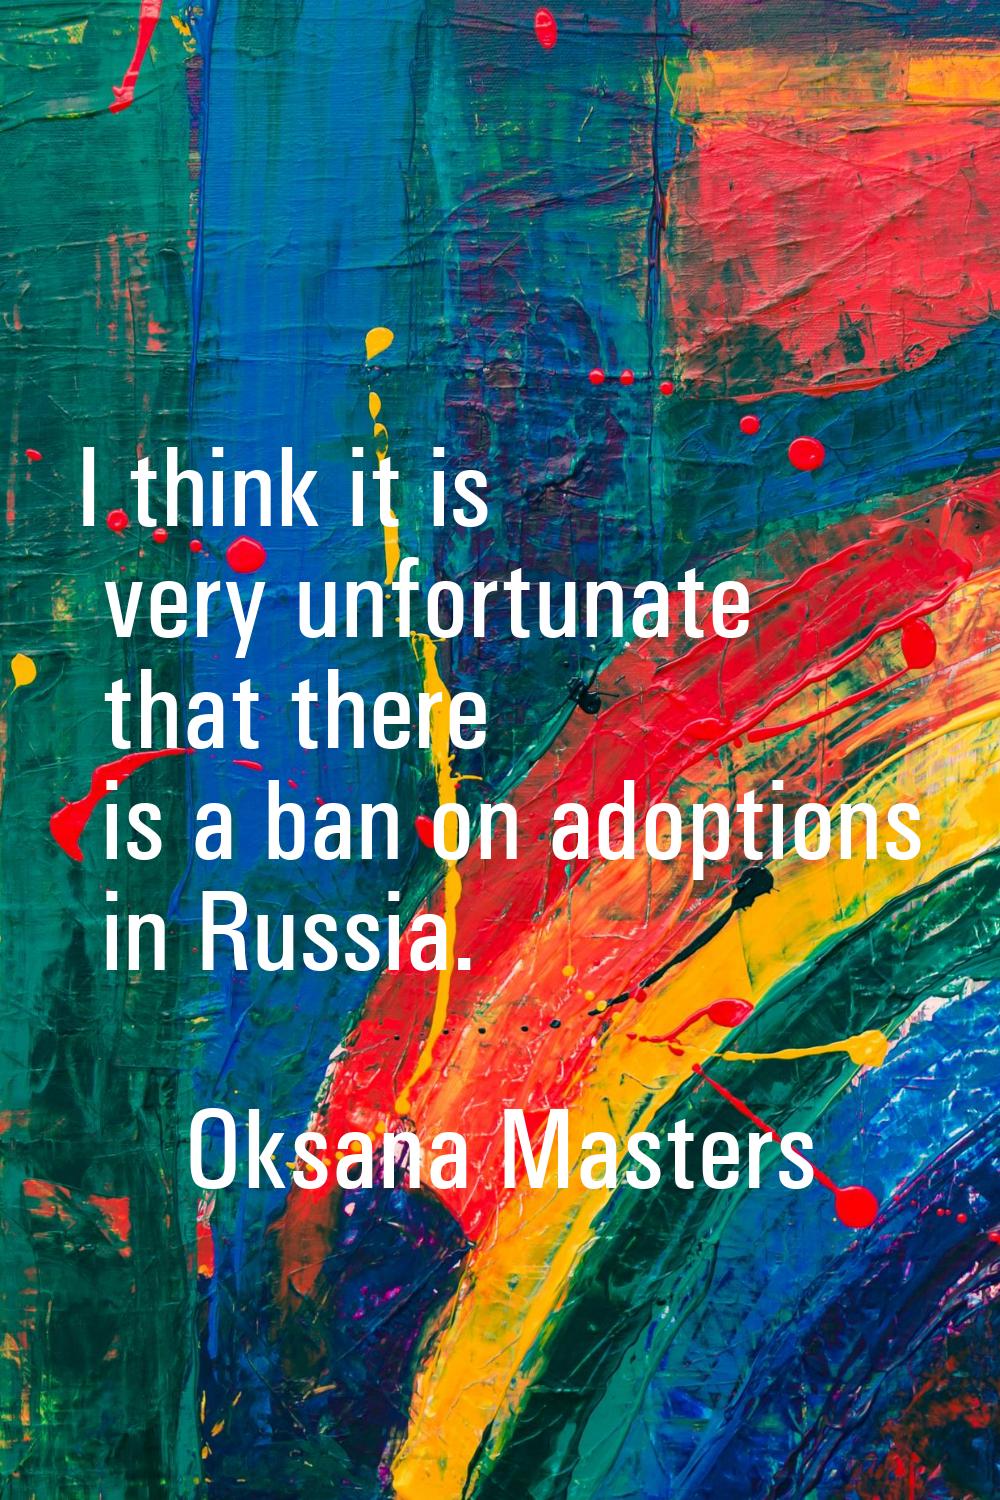 I think it is very unfortunate that there is a ban on adoptions in Russia.